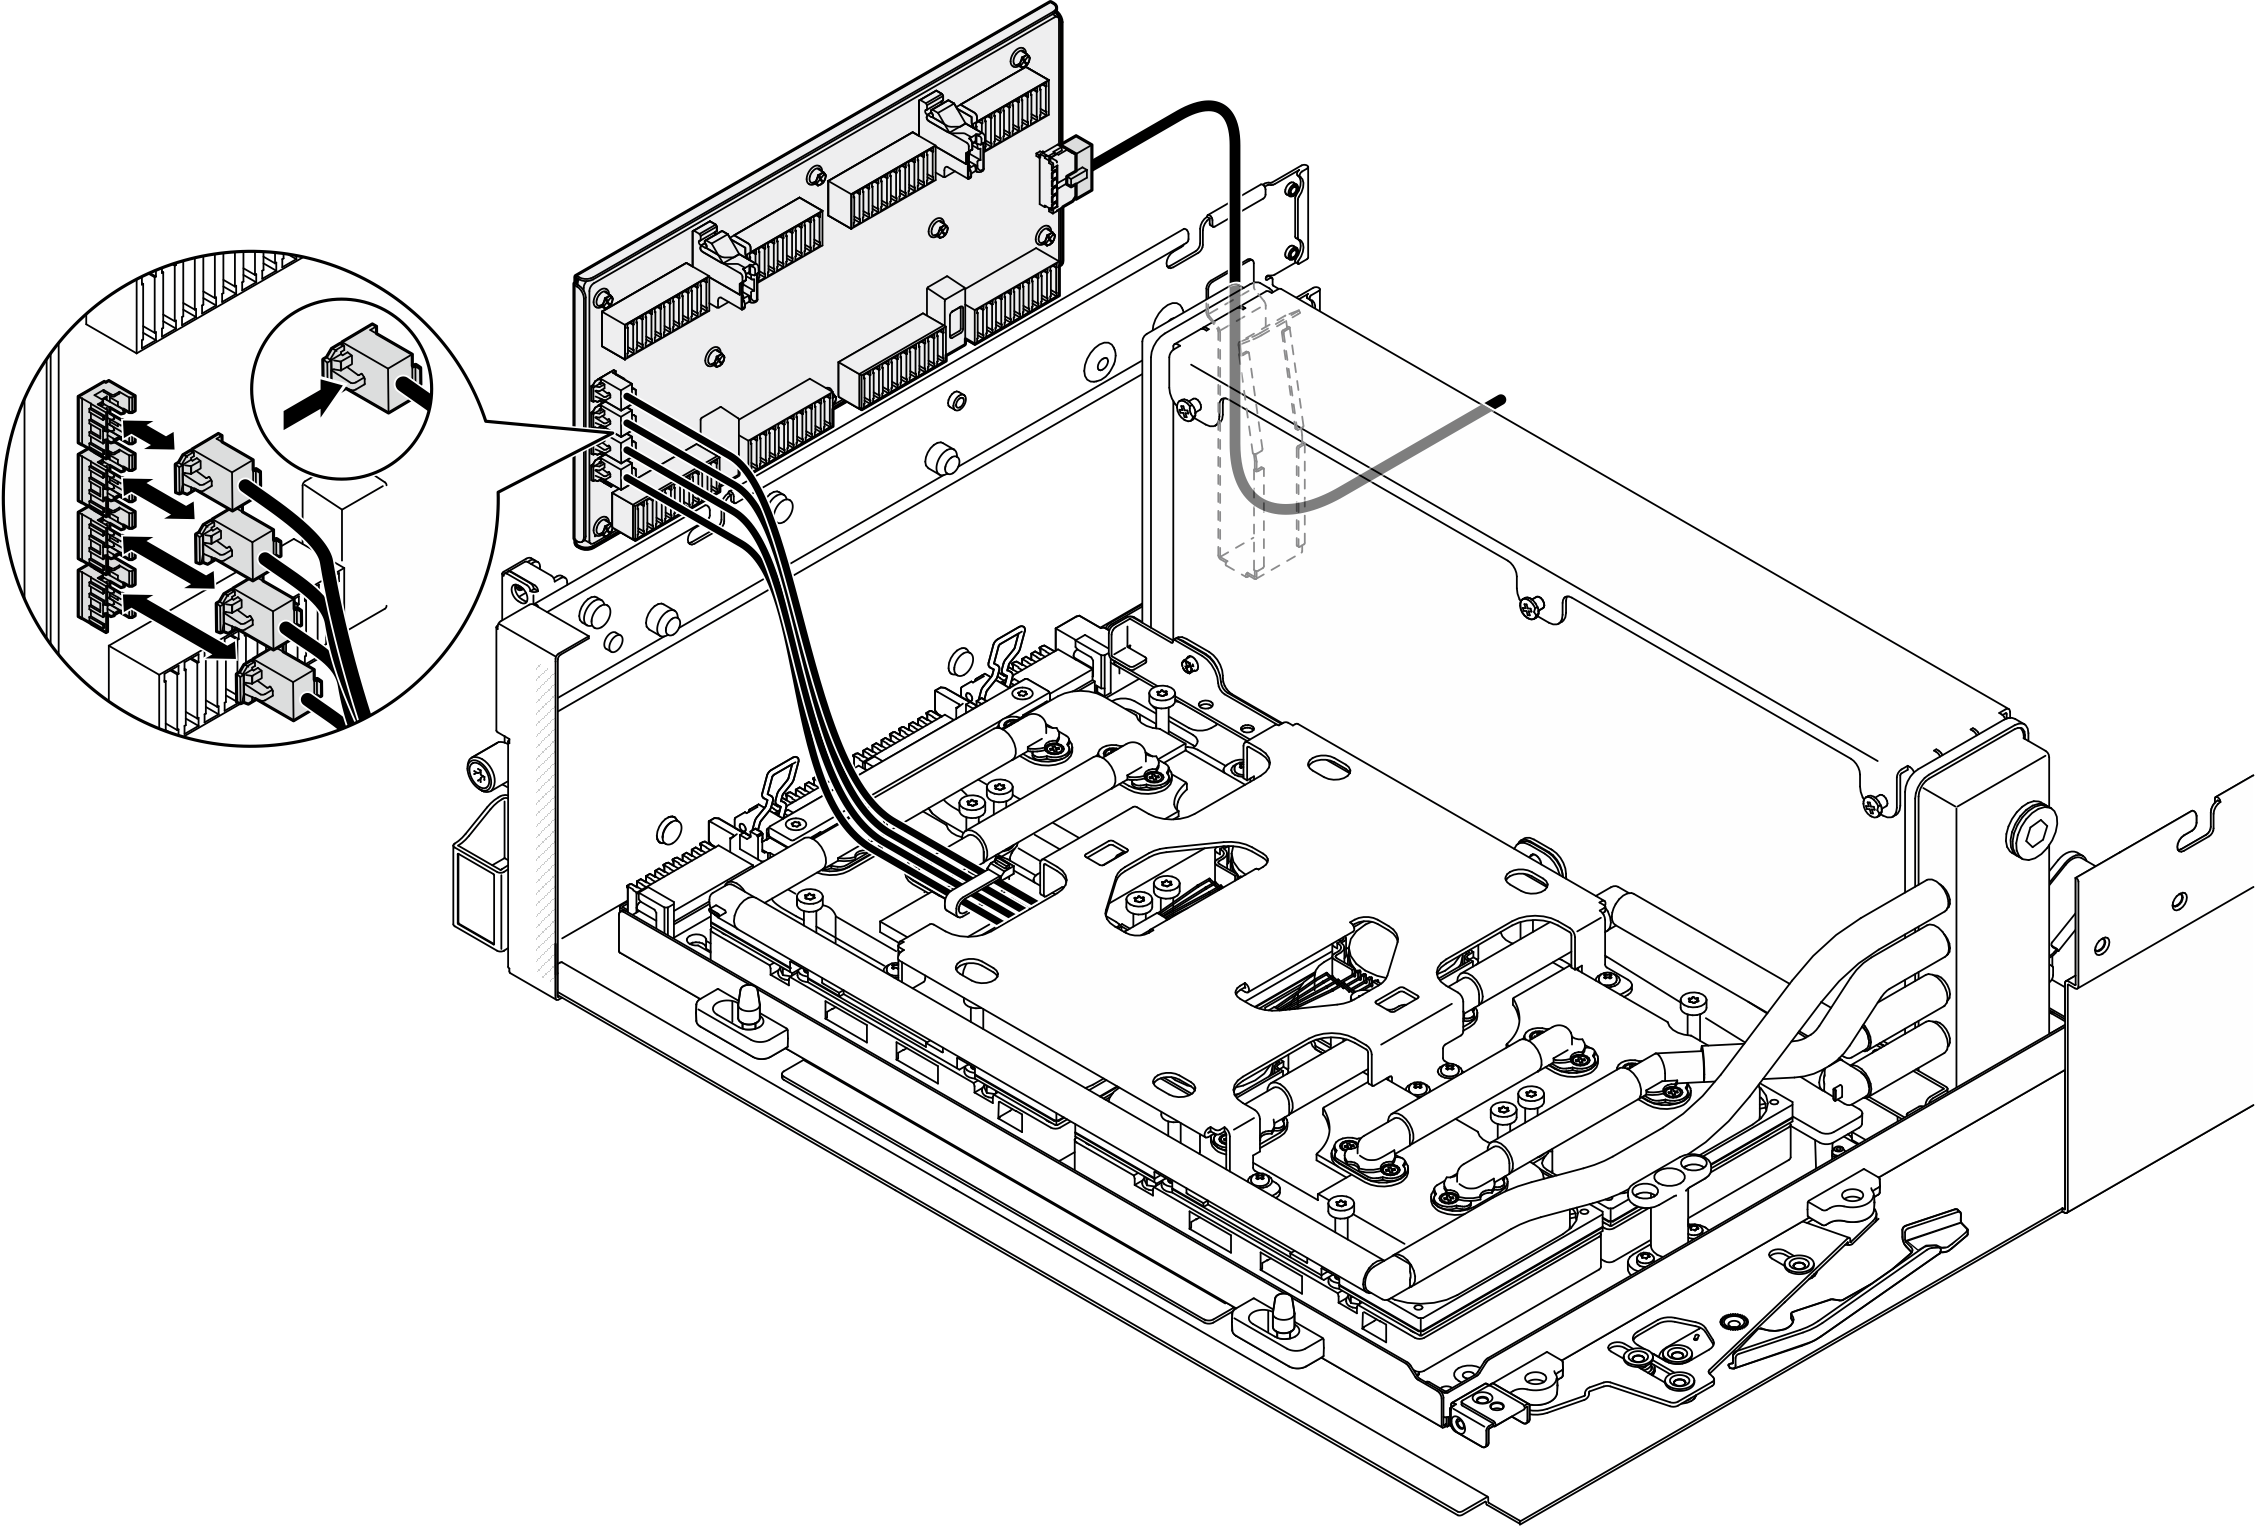 Cold plate assembly pump cable connection